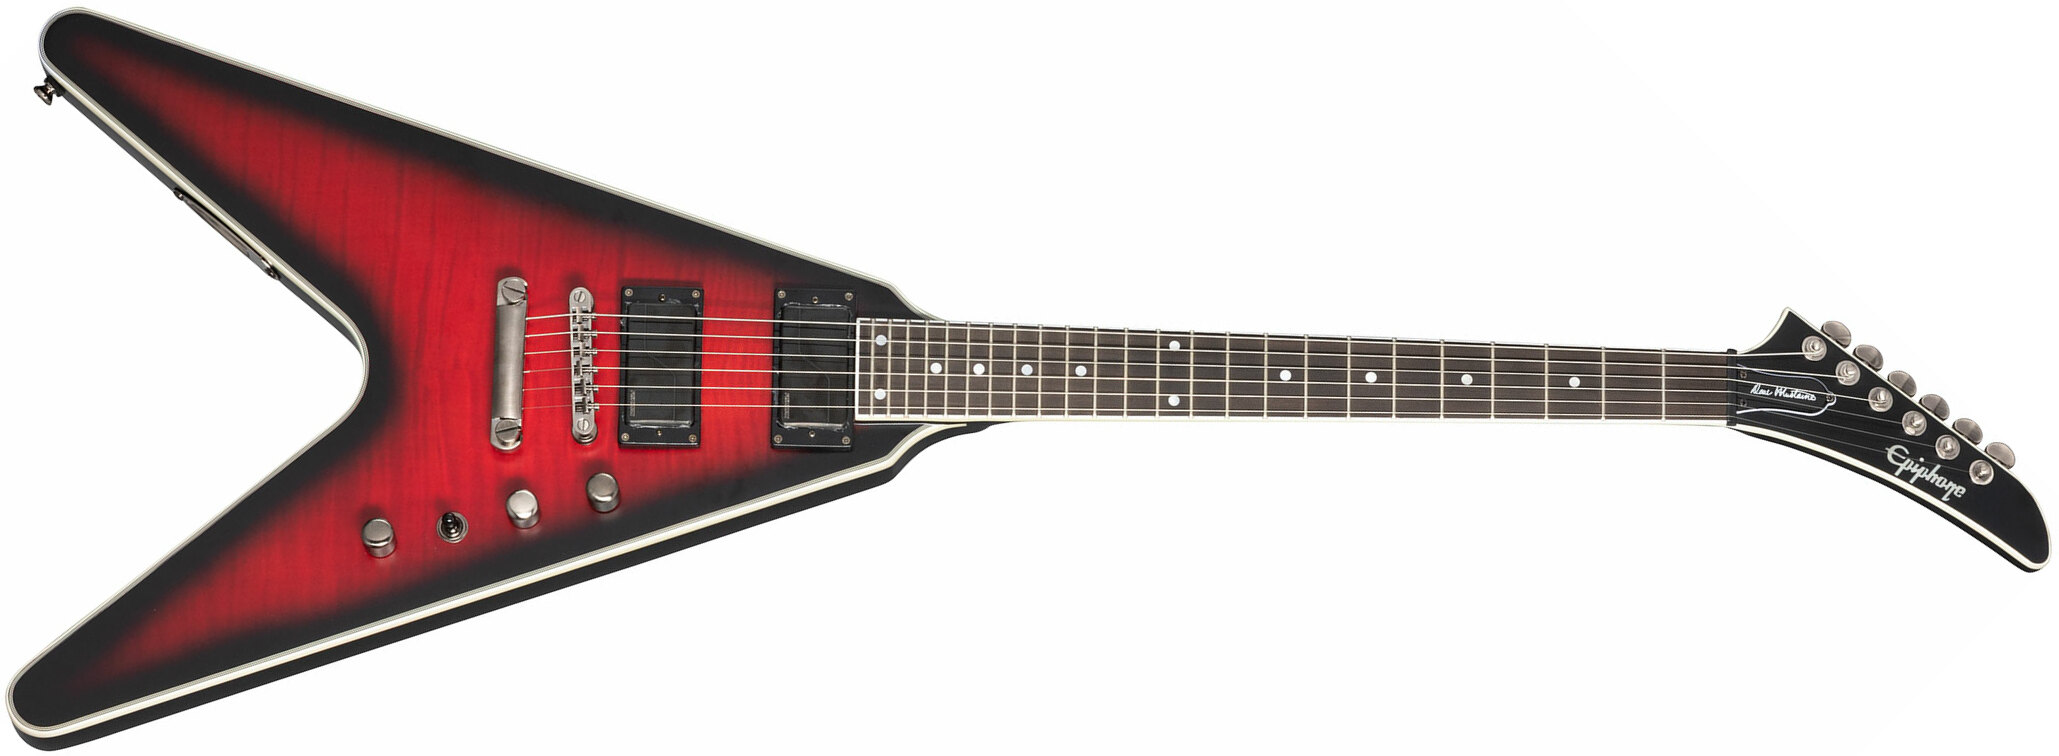 Epiphone Dave Mustaine Flying V Prophecy 2h Fishman Fluence Ht Eb - Aged Dark Red Burst - Guitarra electrica metalica - Main picture